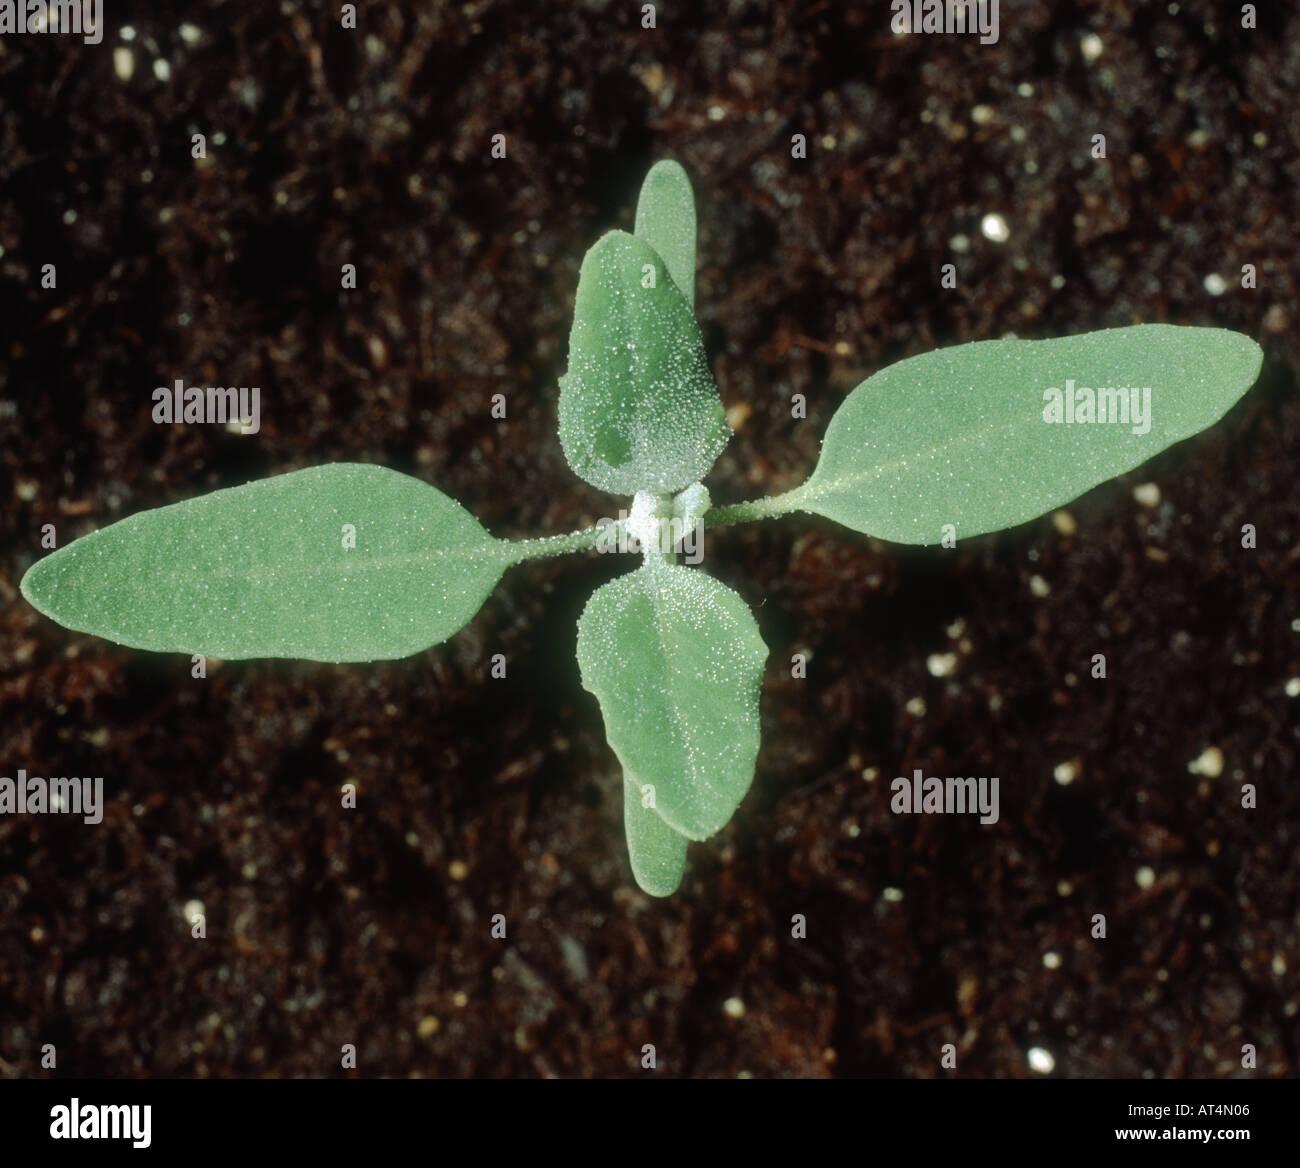 Fat hen Chenopodium album seedling with four true leaves Stock Photo